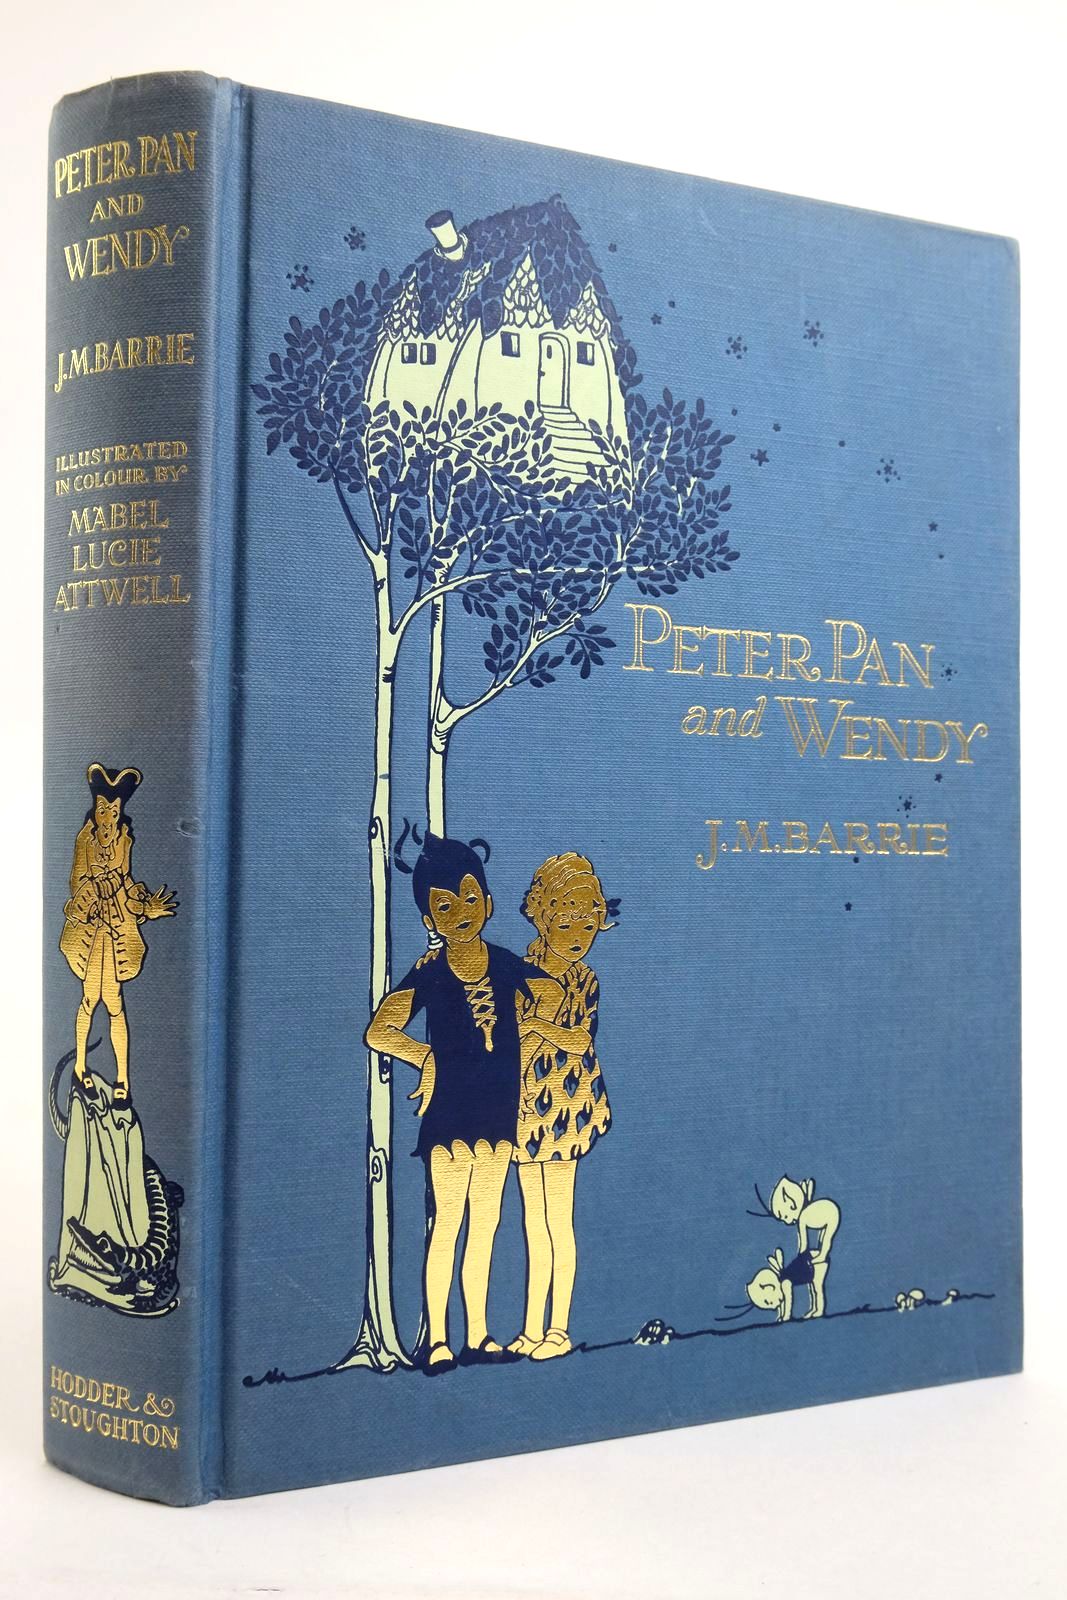 Photo of PETER PAN AND WENDY written by Barrie, J.M. illustrated by Attwell, Mabel Lucie published by Hodder &amp; Stoughton (STOCK CODE: 2135932)  for sale by Stella & Rose's Books